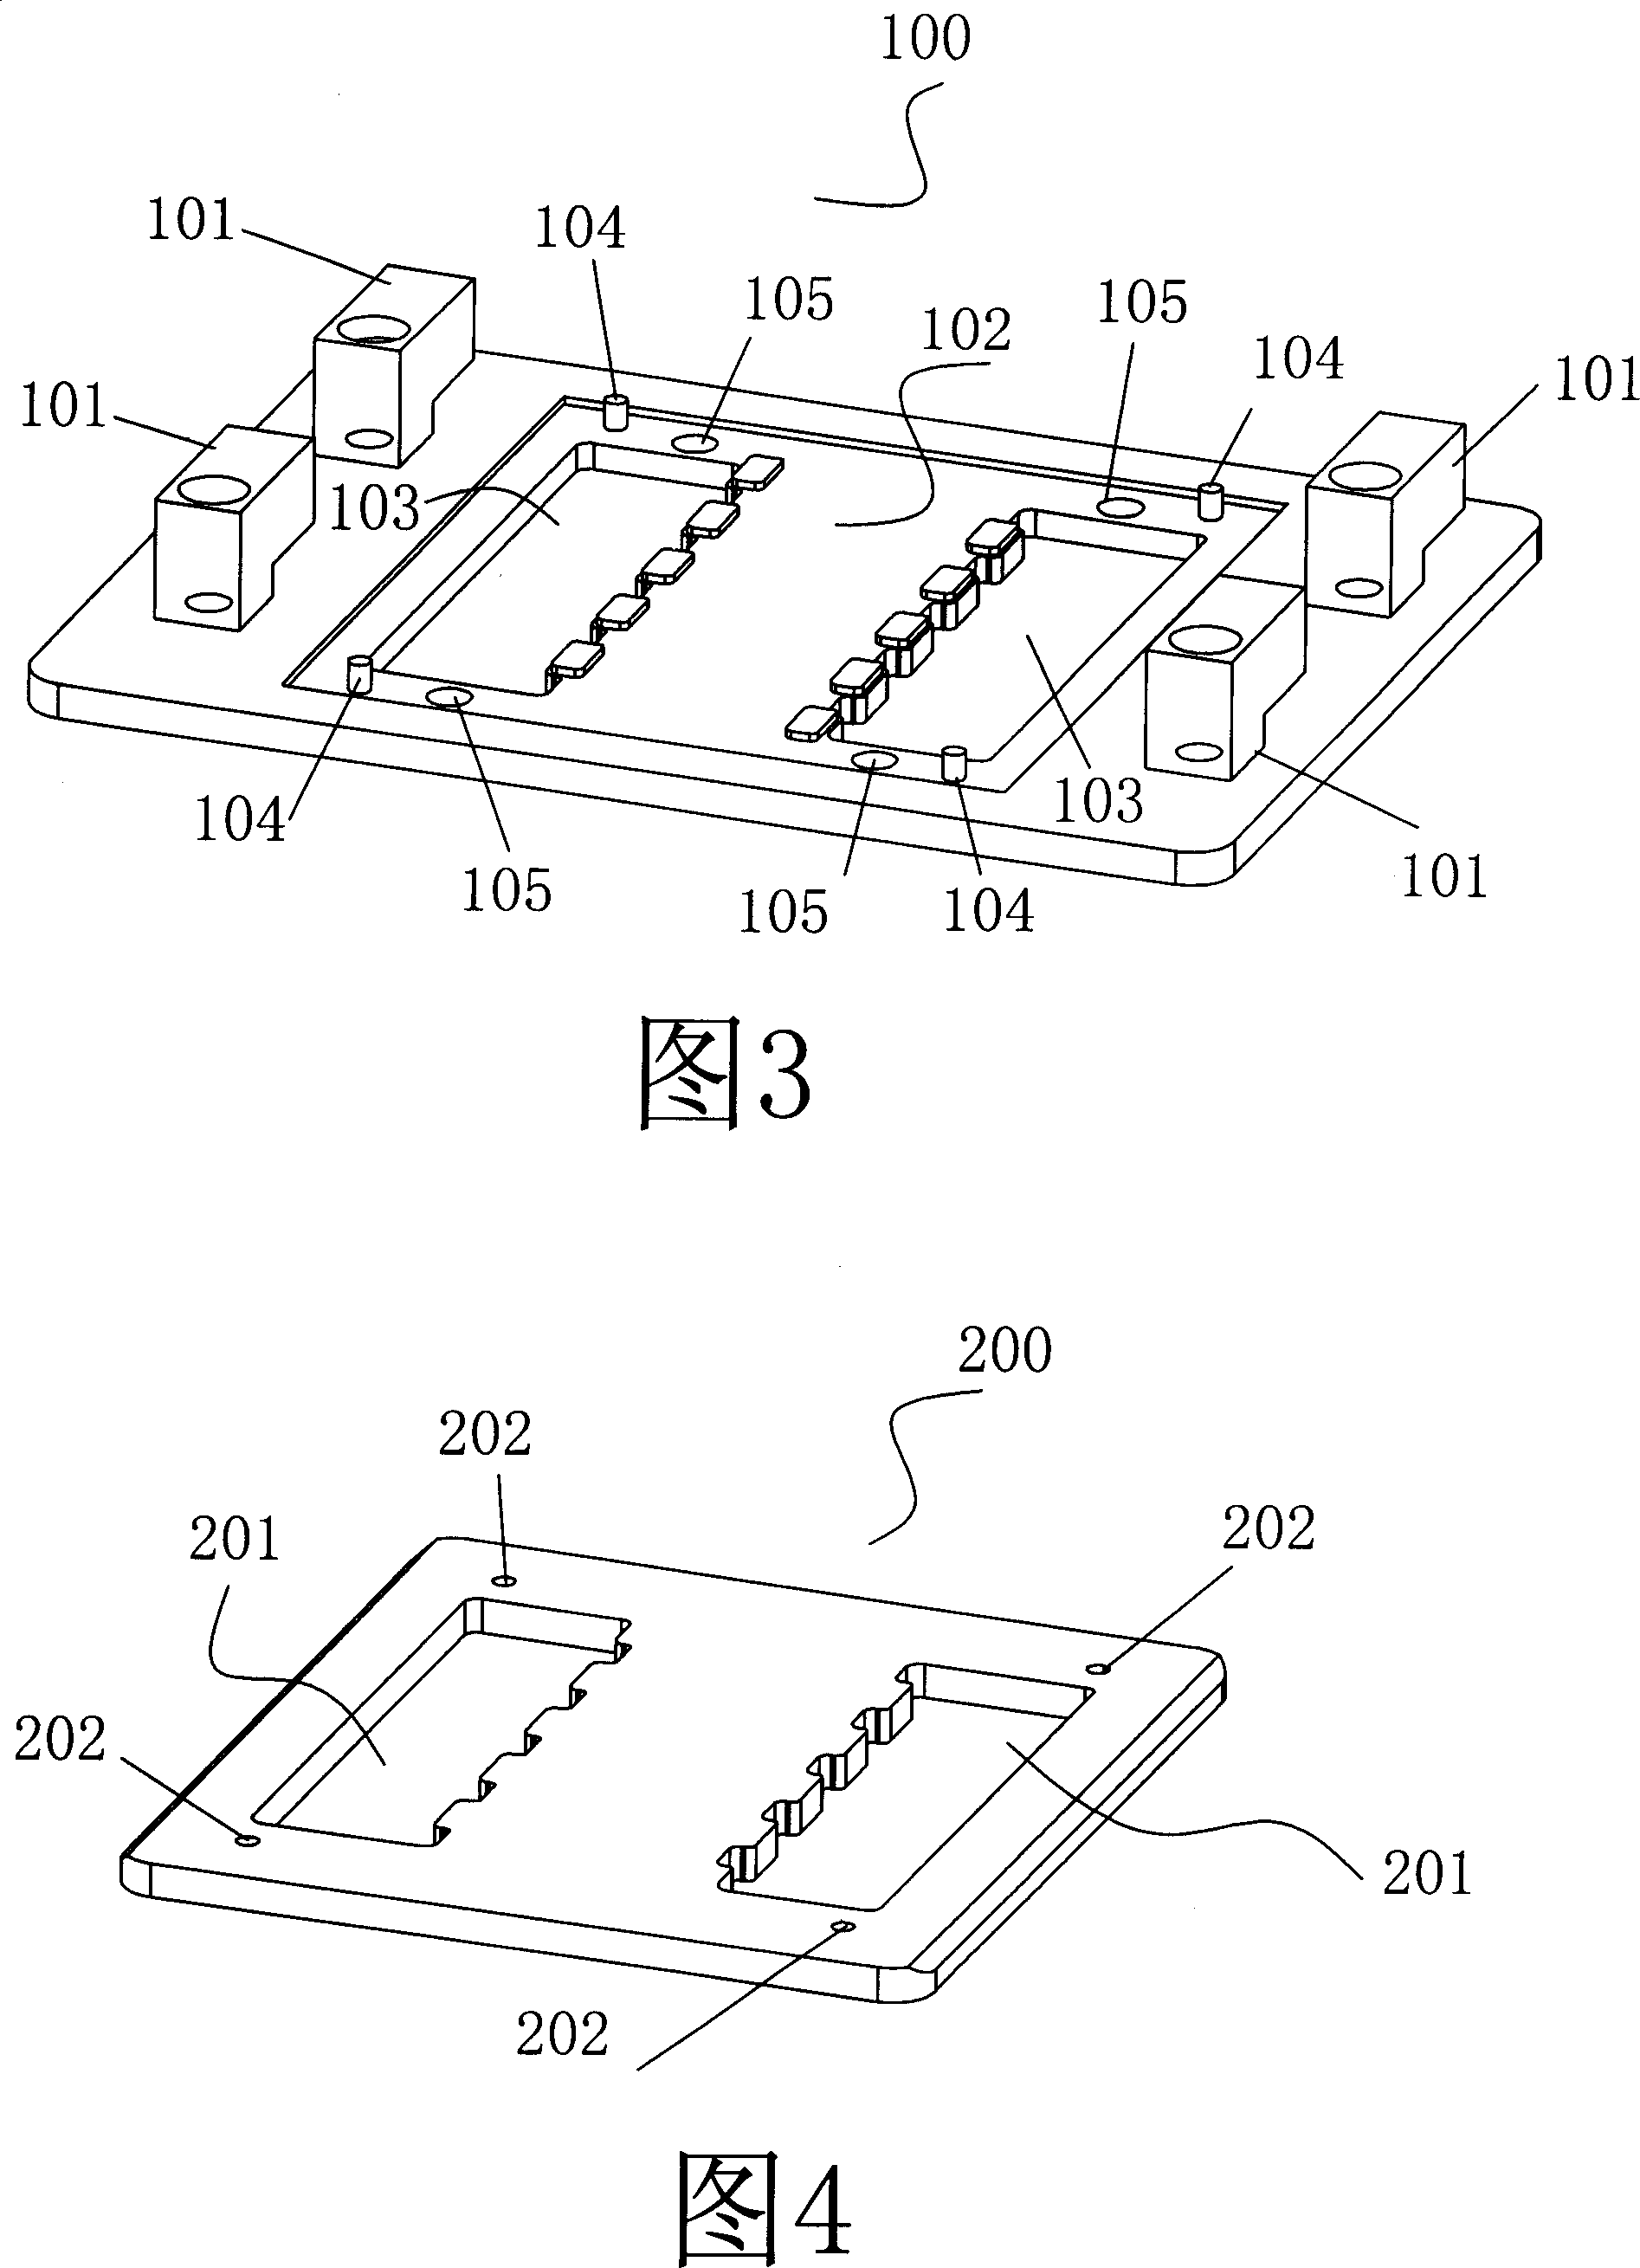 Method for welding FPC plate with PCB plate and its dedicated clamp